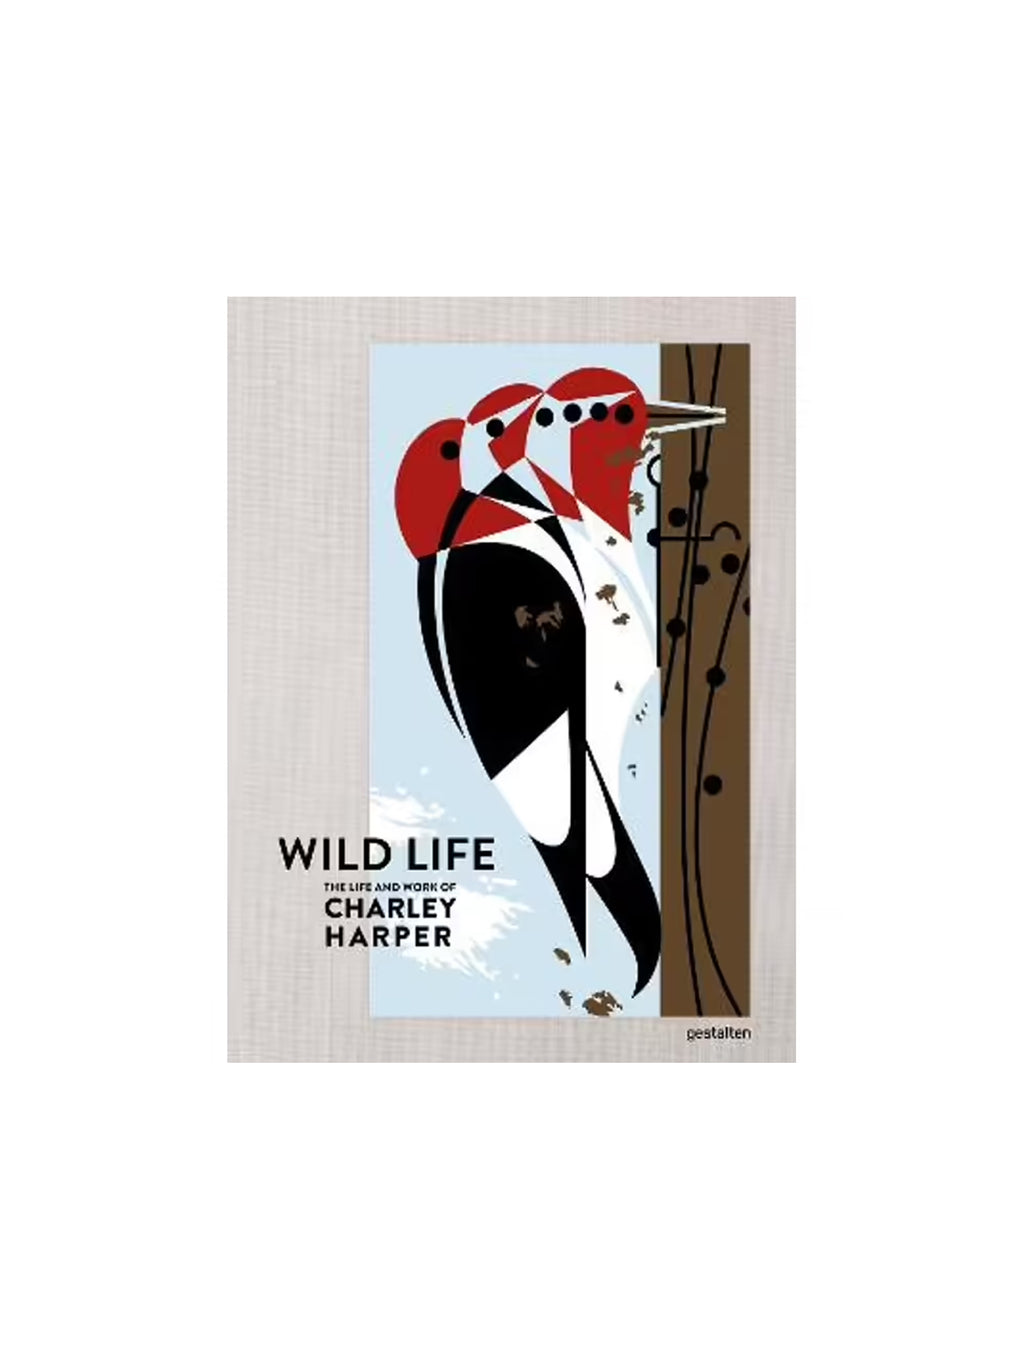 The Wild Life : The Life and Work of Charley Harper